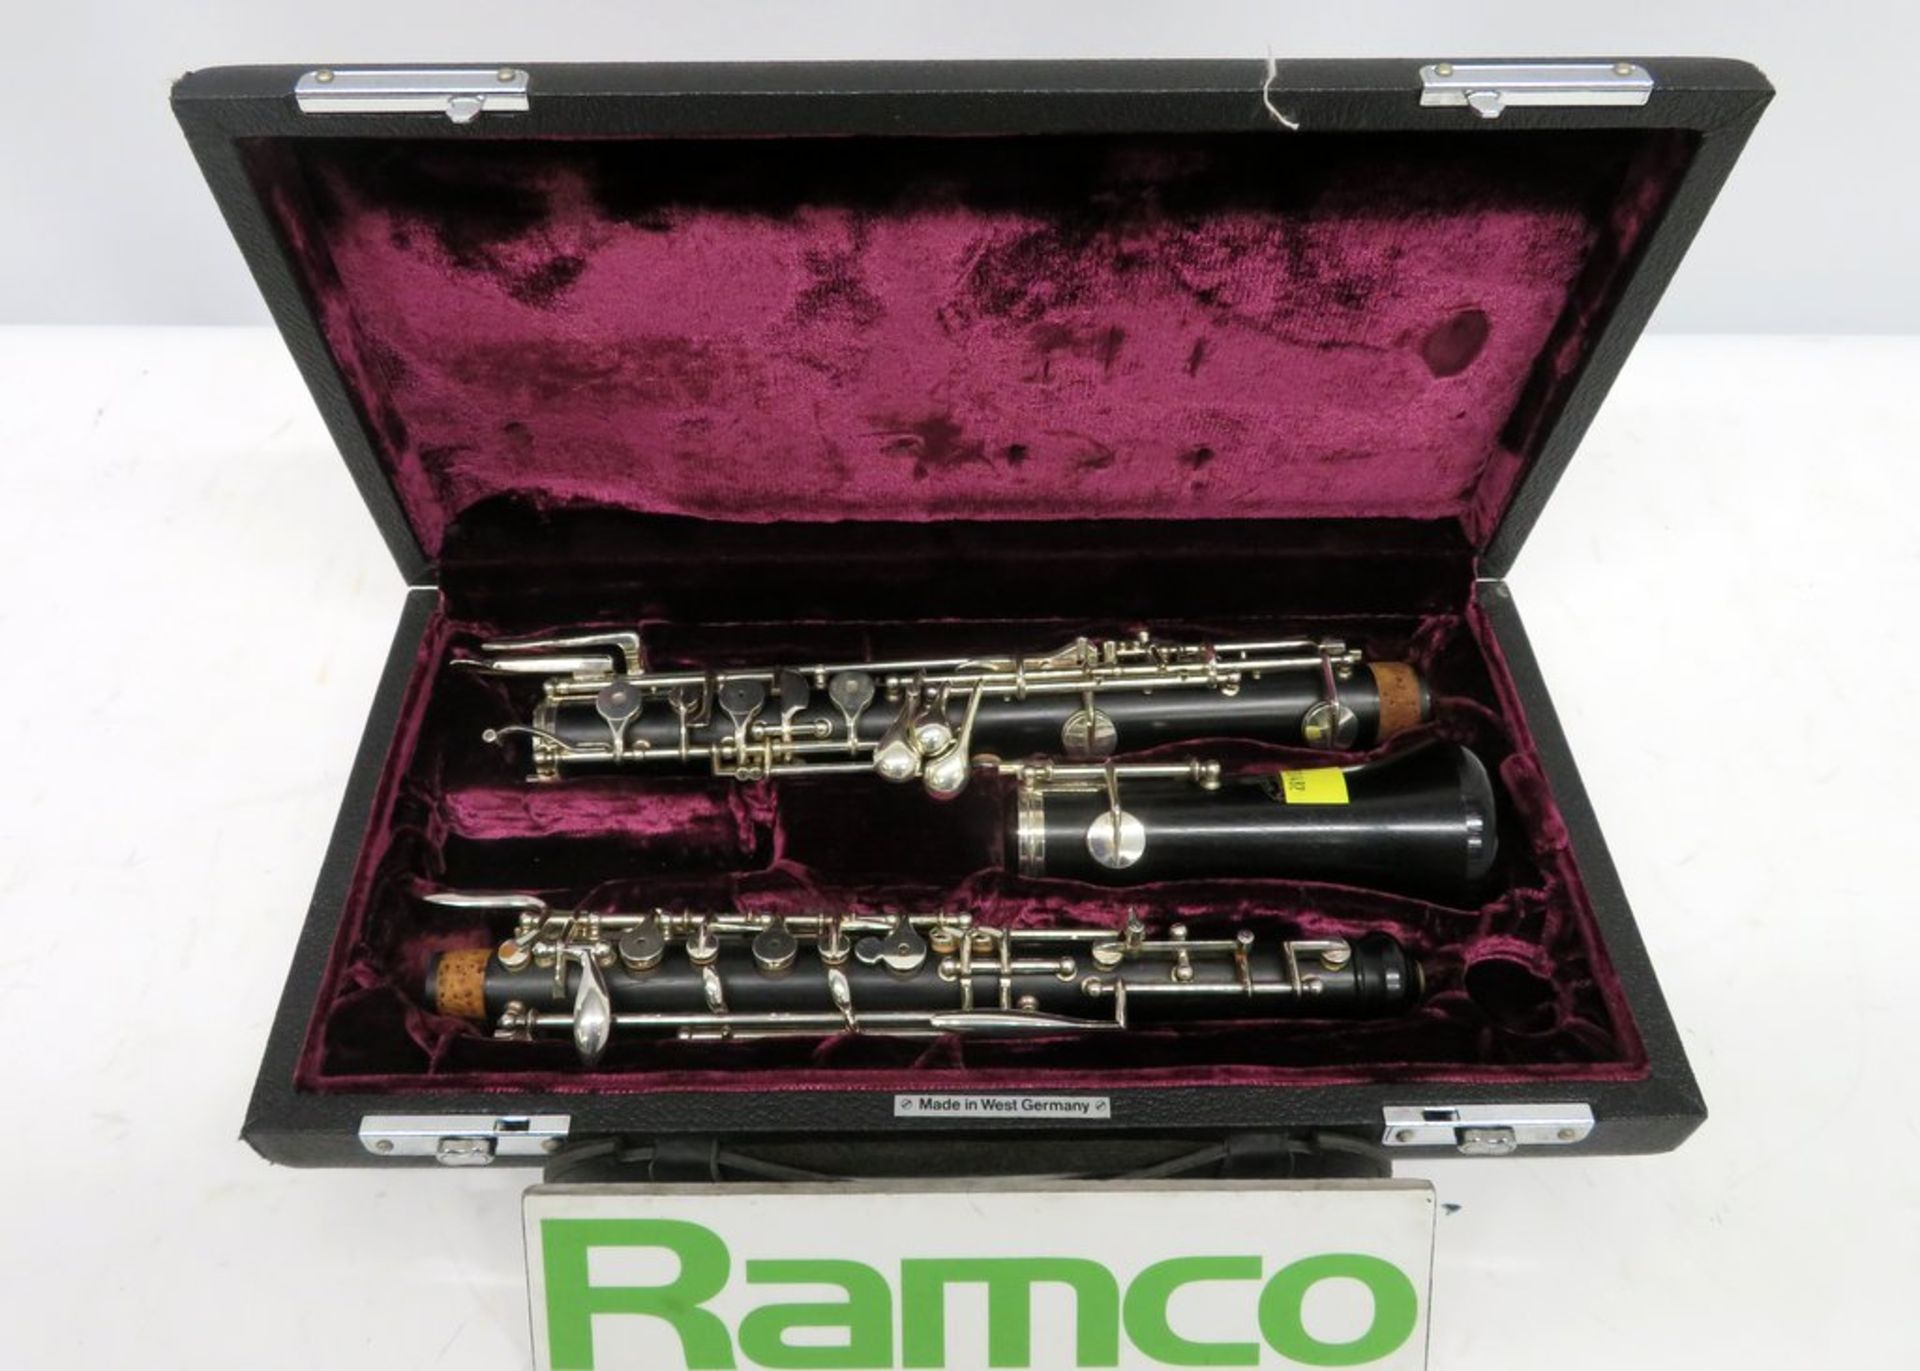 Buffet Crampon Oboe Complete With Case.